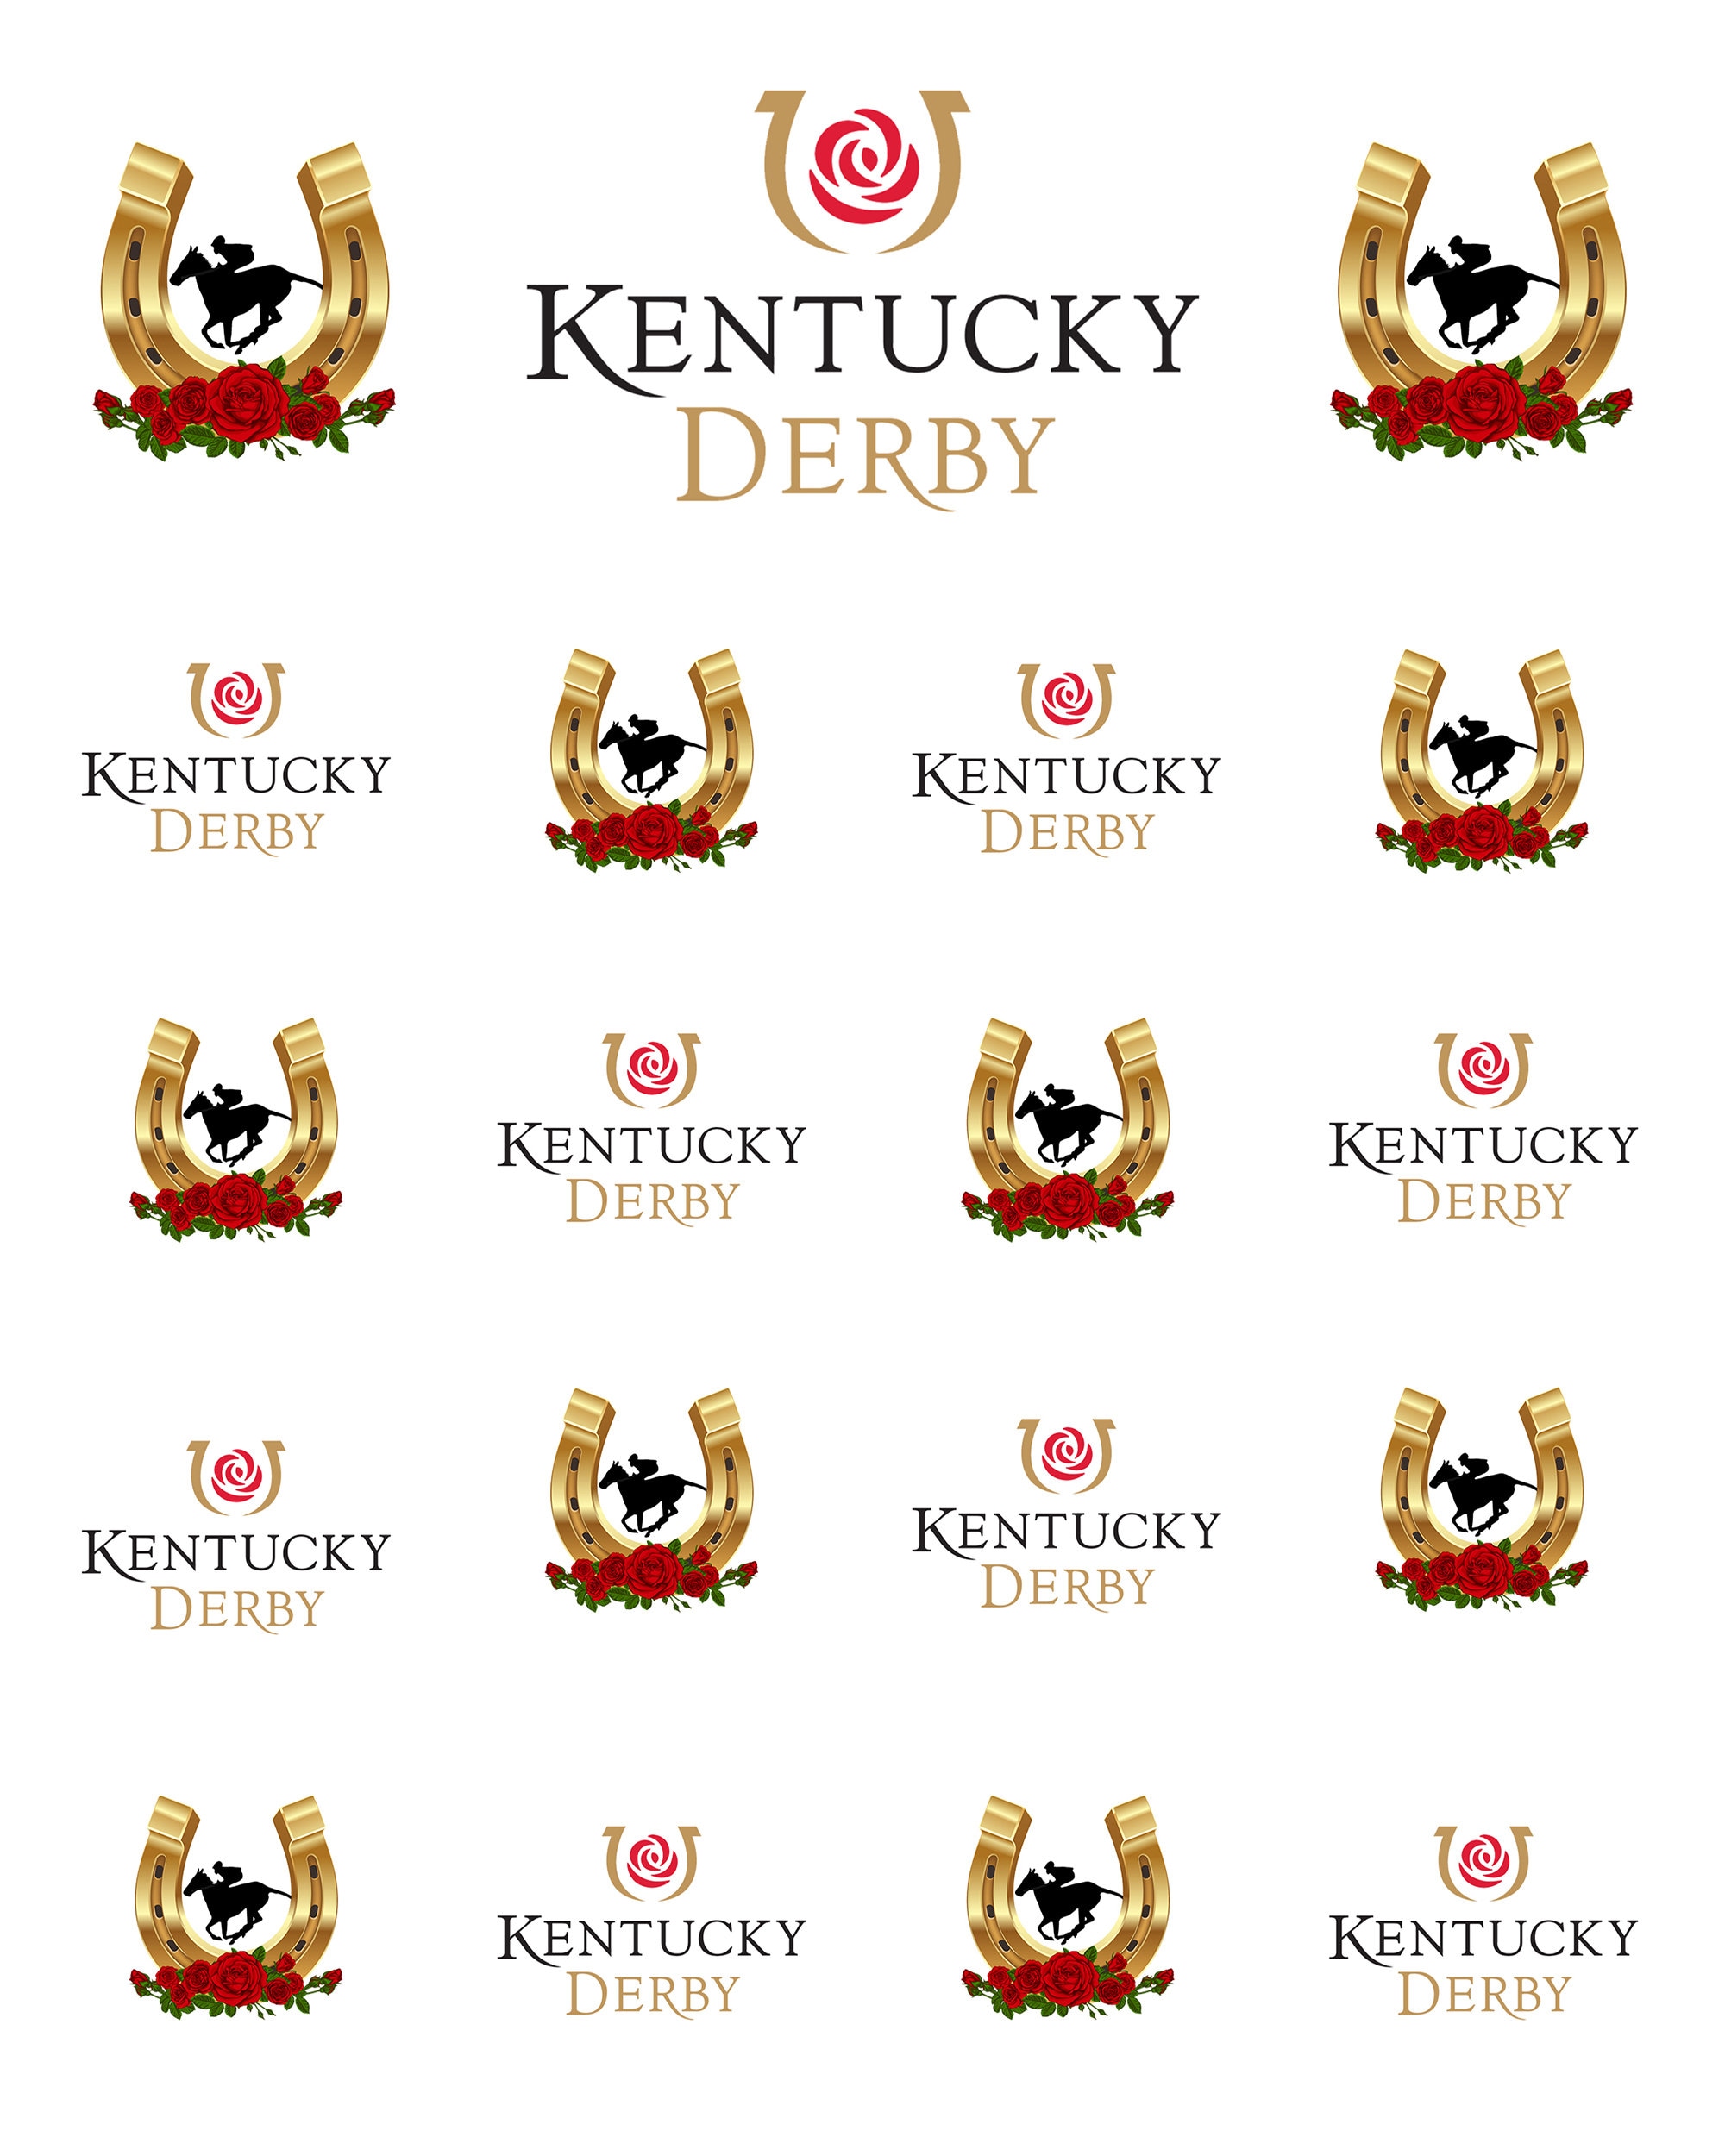 Horse Race Kentucky Derby Photo Backdrops Booth Ourdoor Sports Photography Studio Vinyl Backgrounds for Party Props